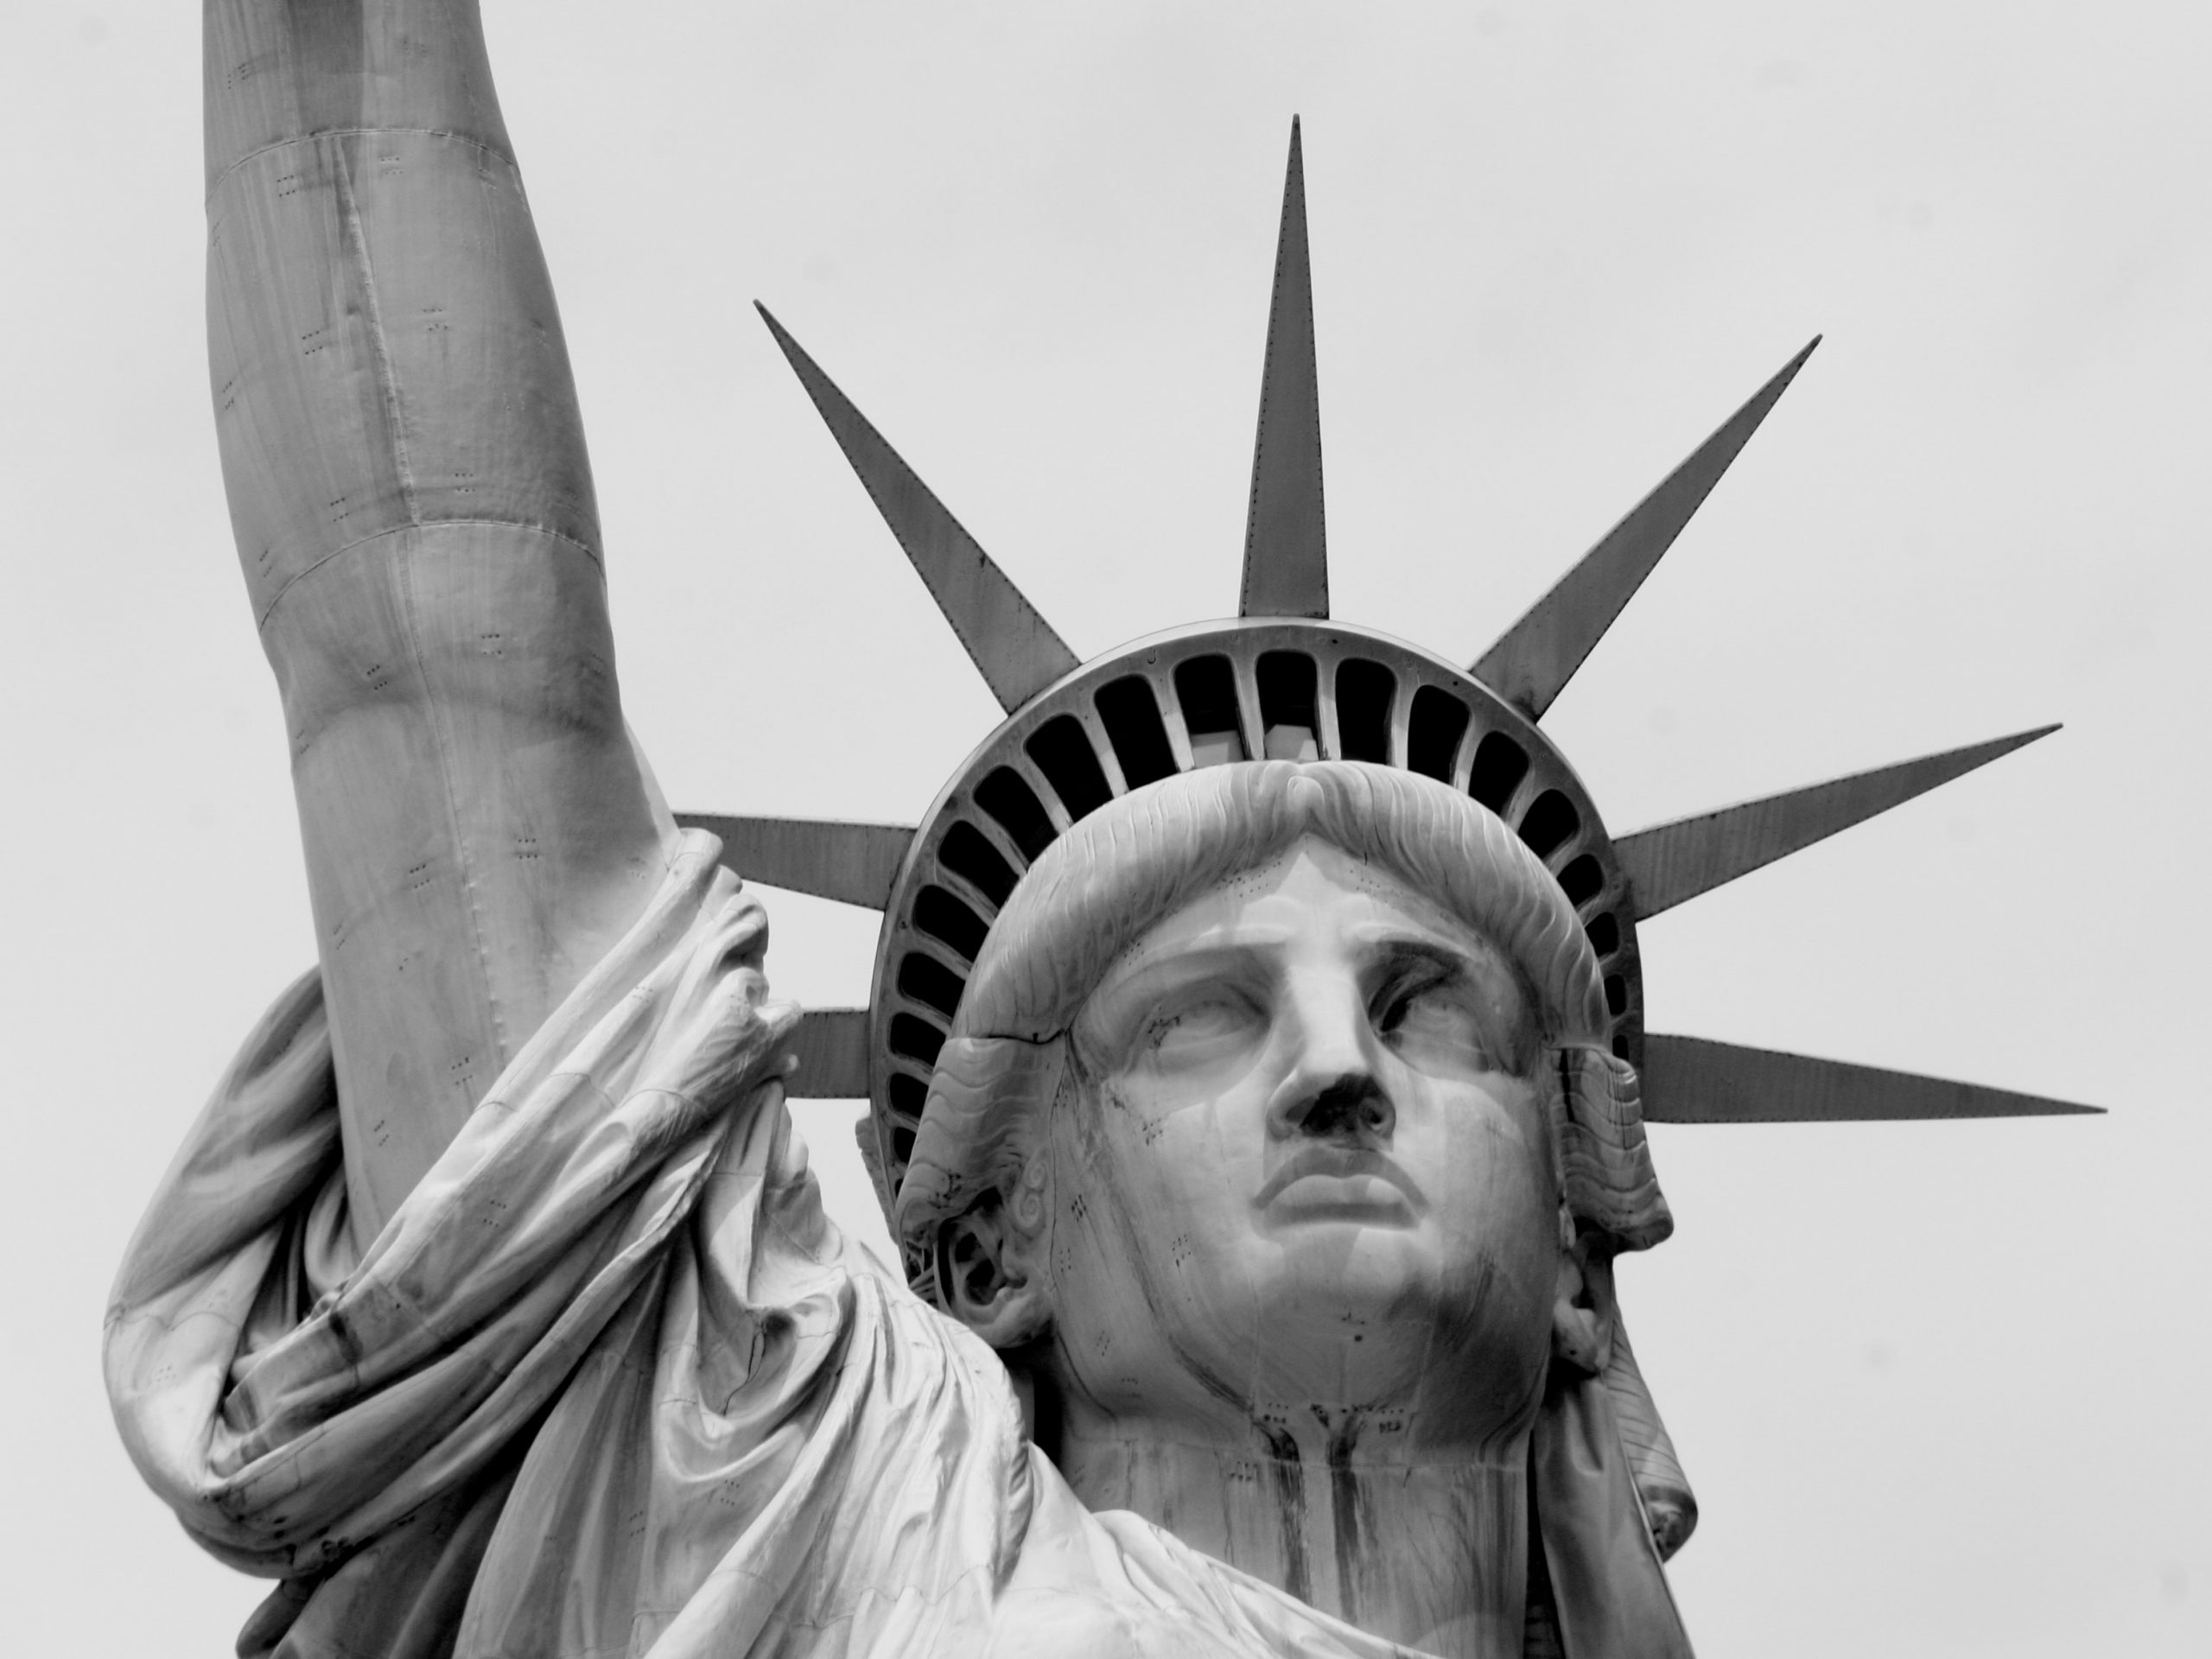 Image of the statue of liberty's face close up, in black and white